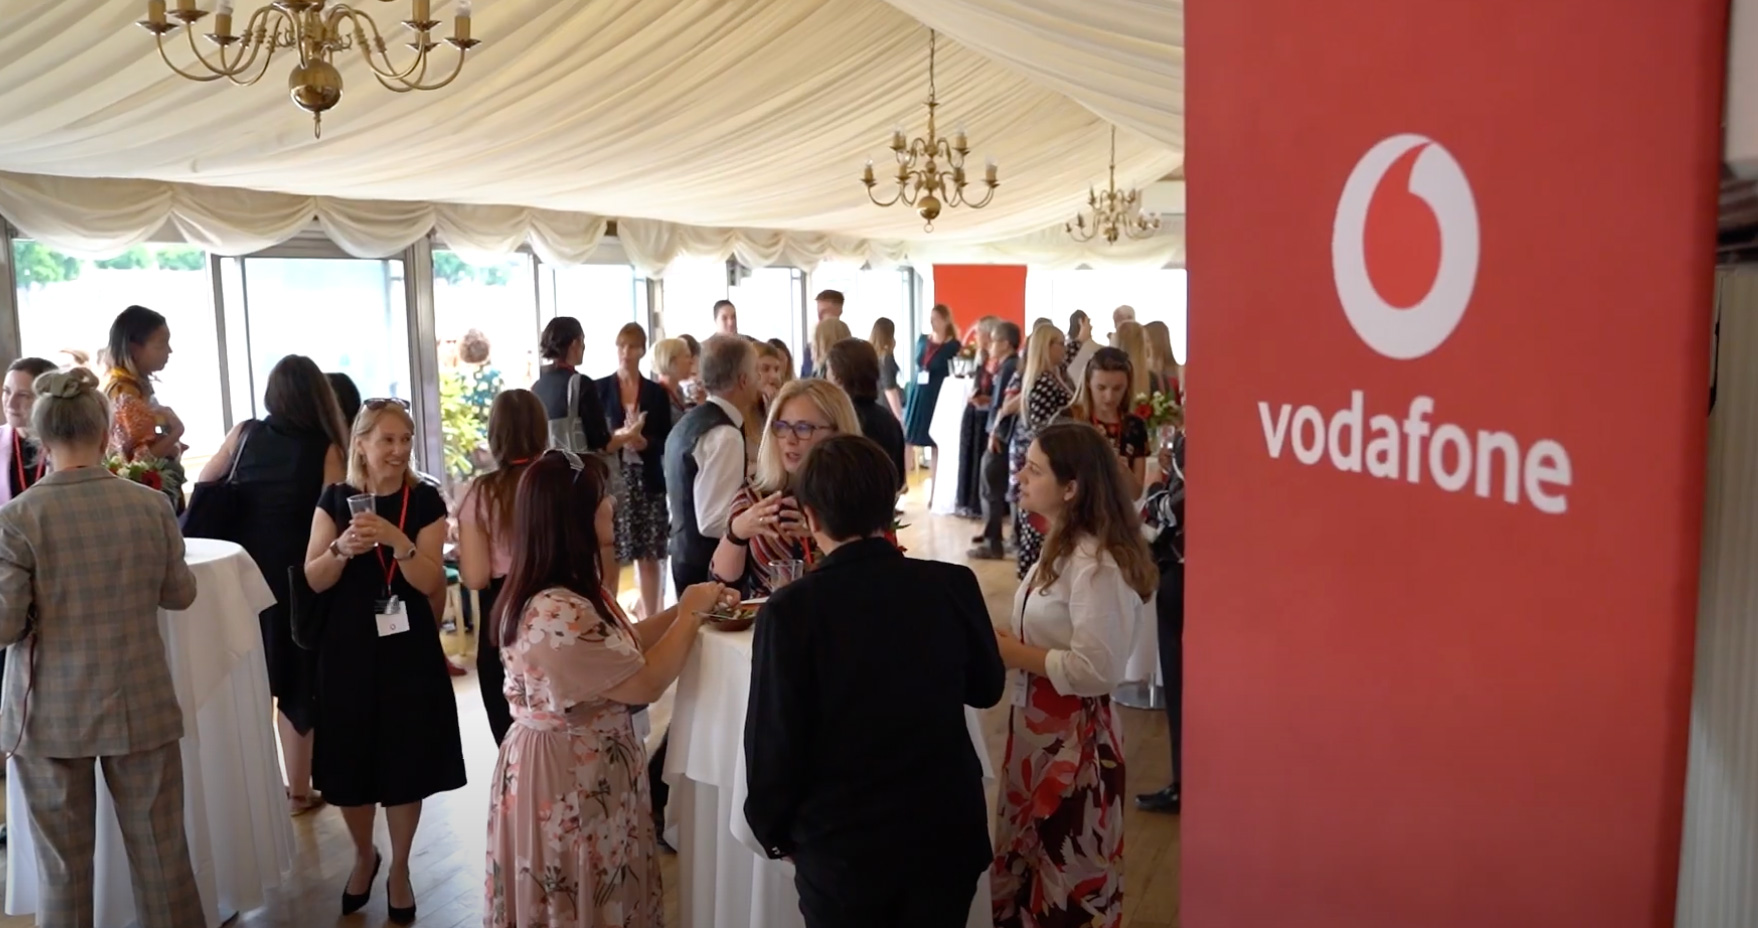 A group of people at an event inside with Vodafone branding